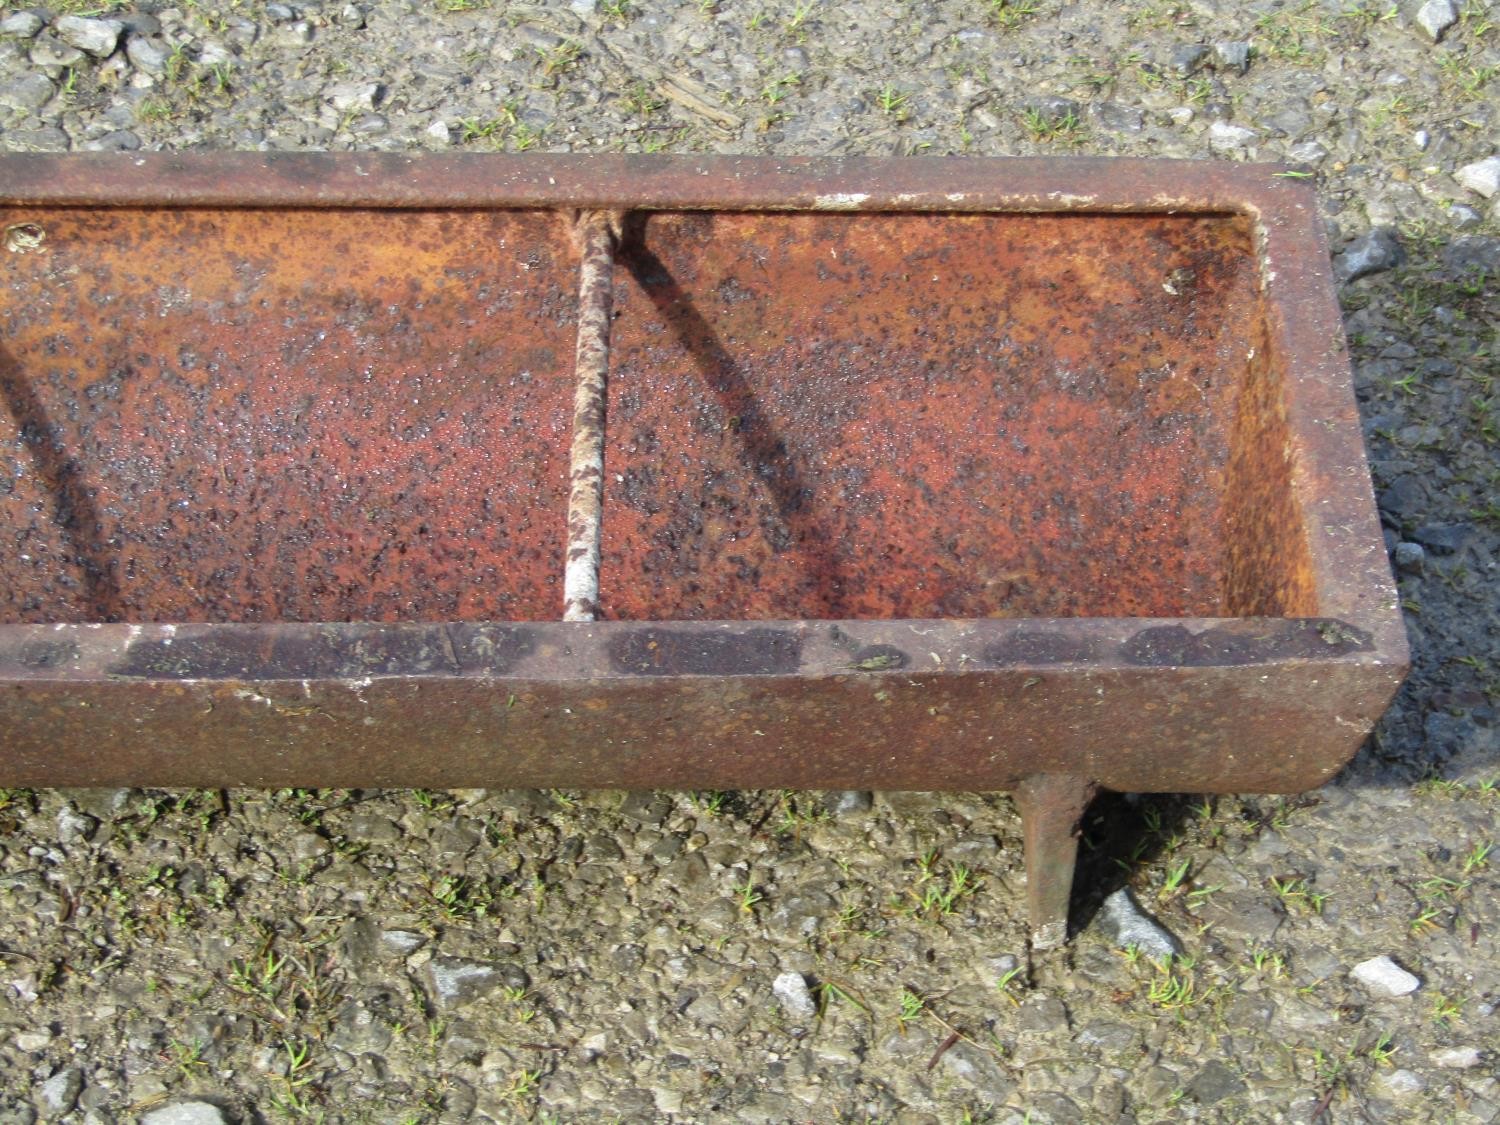 An old cast iron rectangular pig trough with five simple rung divisions, 181cm long x 32cm wide x - Image 3 of 3